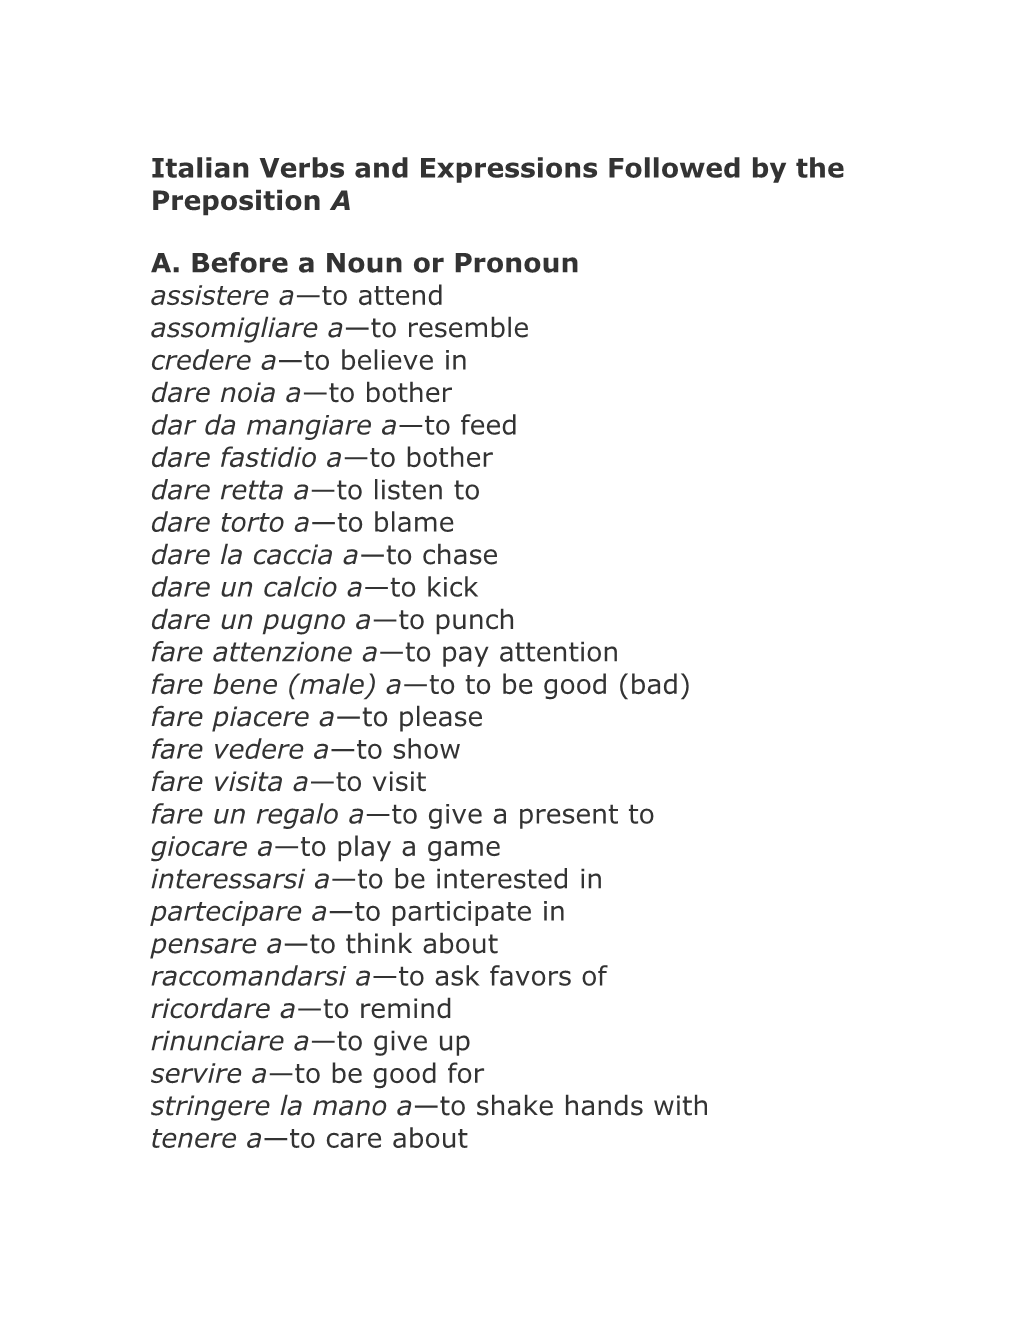 Italian Verbs and Expressions Followed by the Preposition A